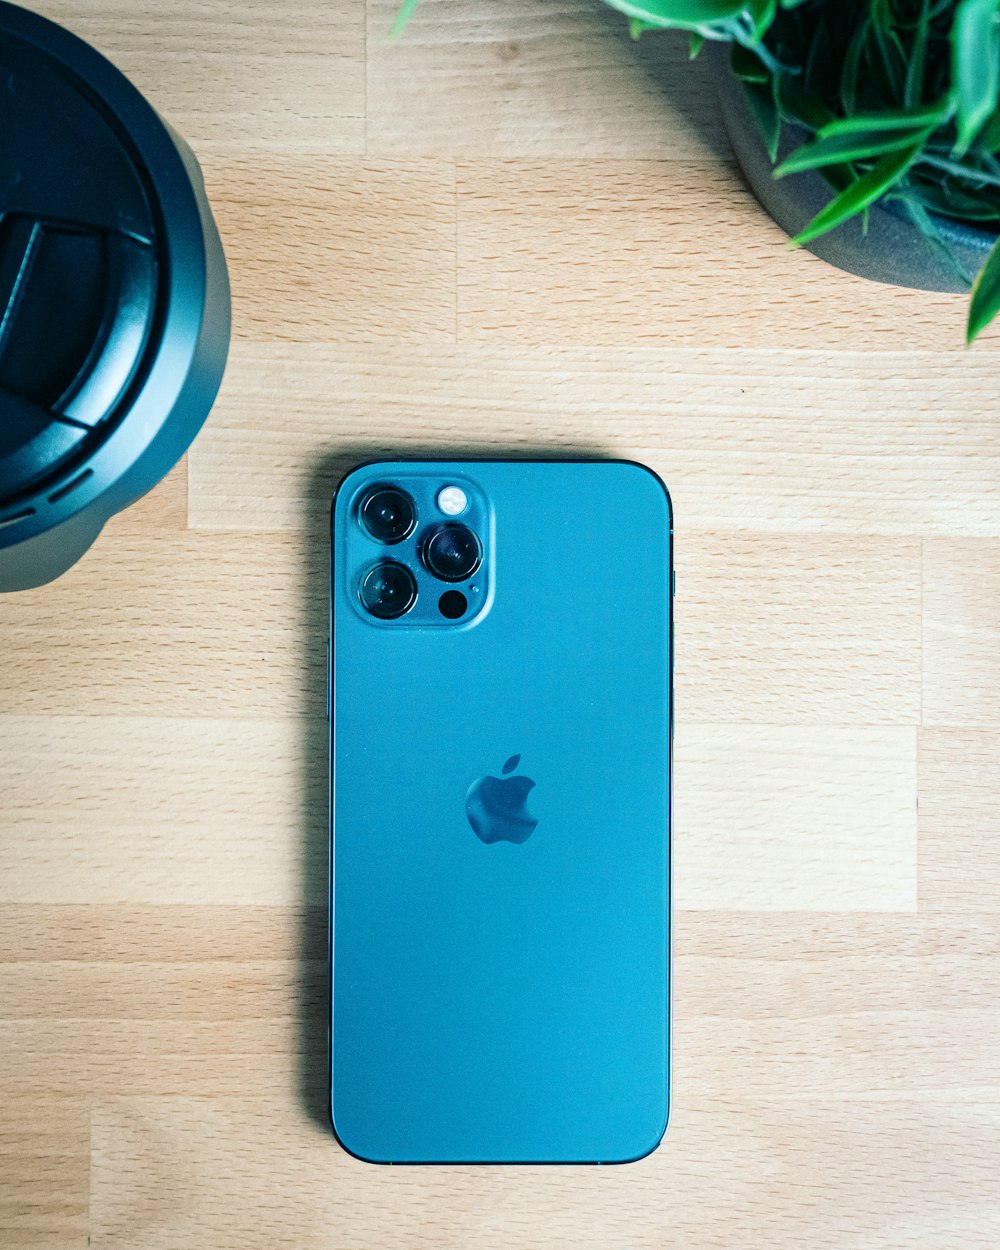 Iphone 12 Pro Pictures Download Free Images On Unsplash